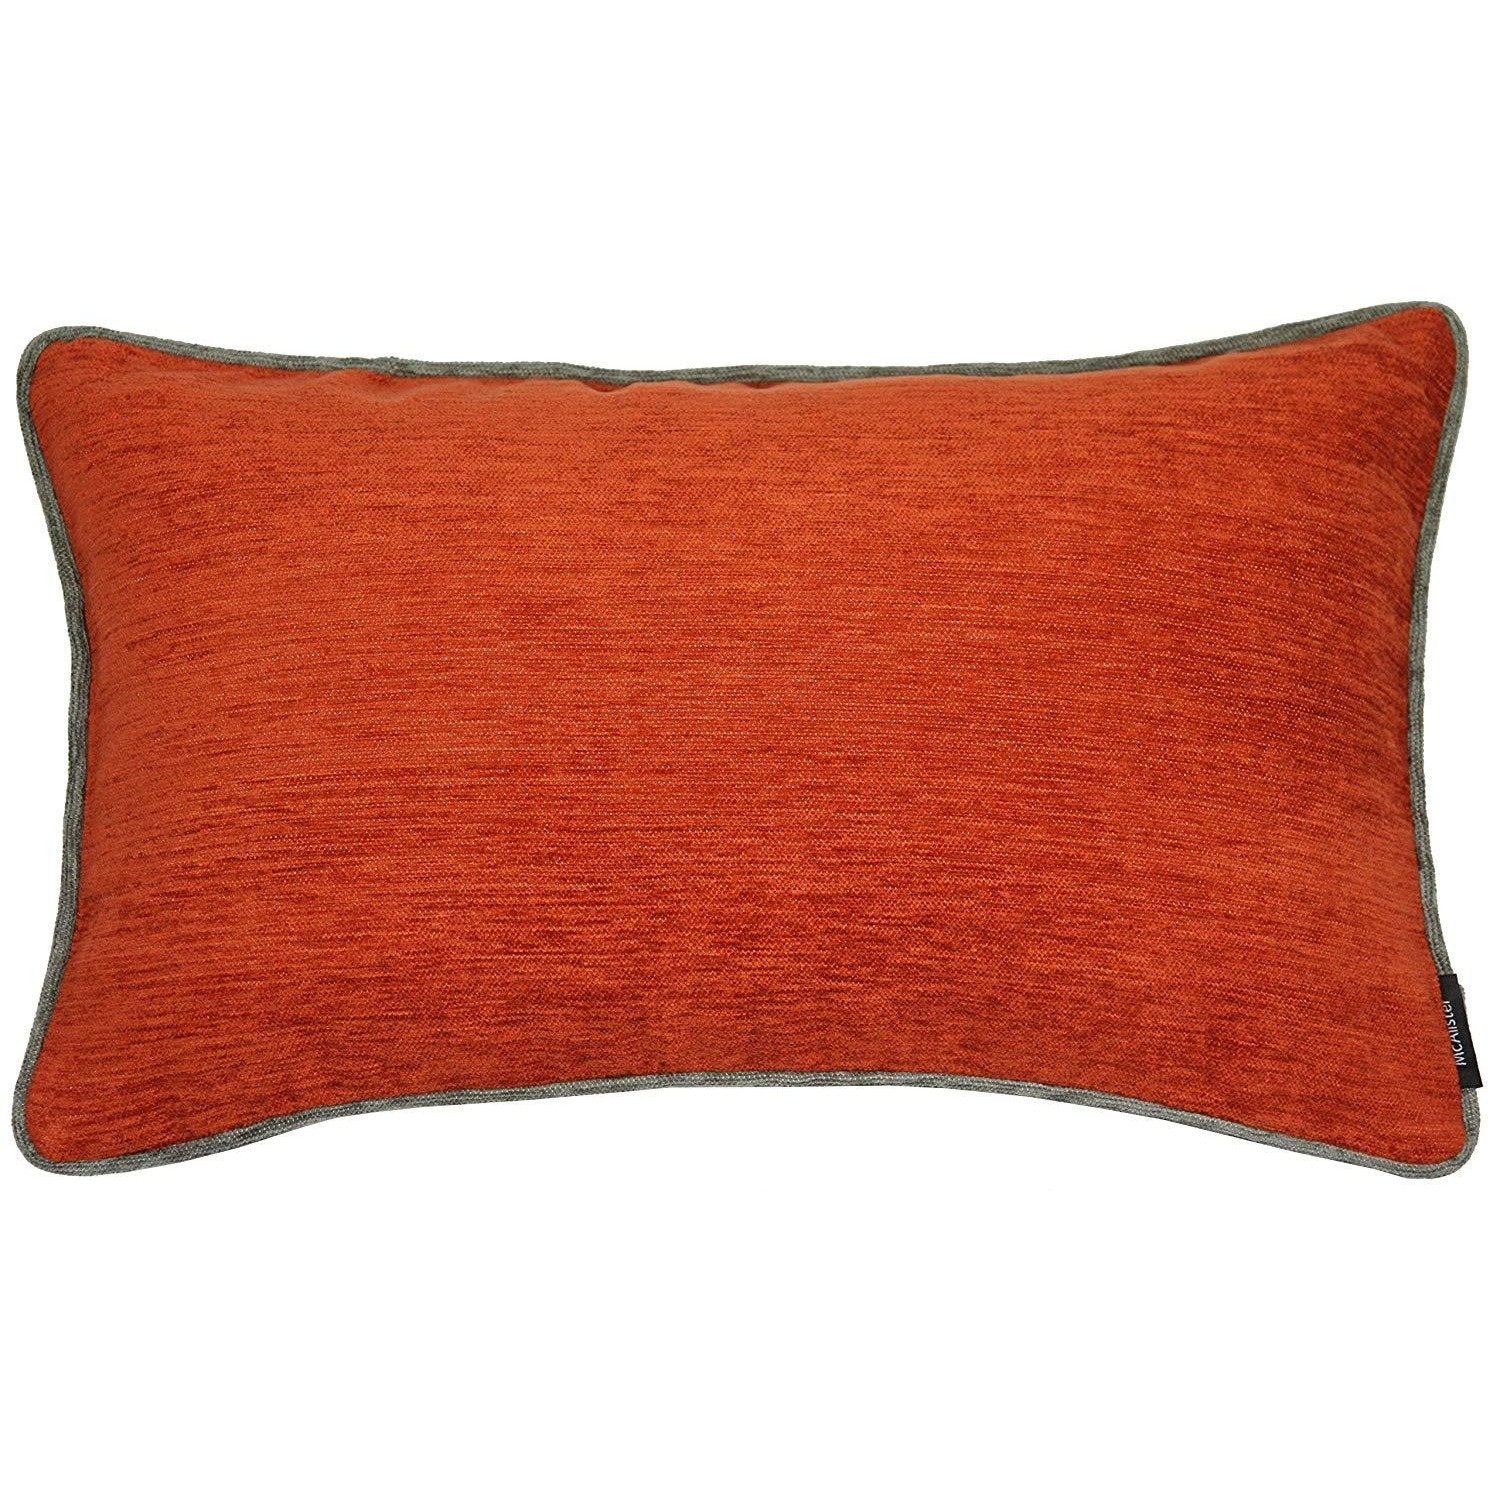 McAlister Textiles Alston Chenille Burnt Orange + Grey Cushion Cushions and Covers Cover Only 50cm x 30cm 